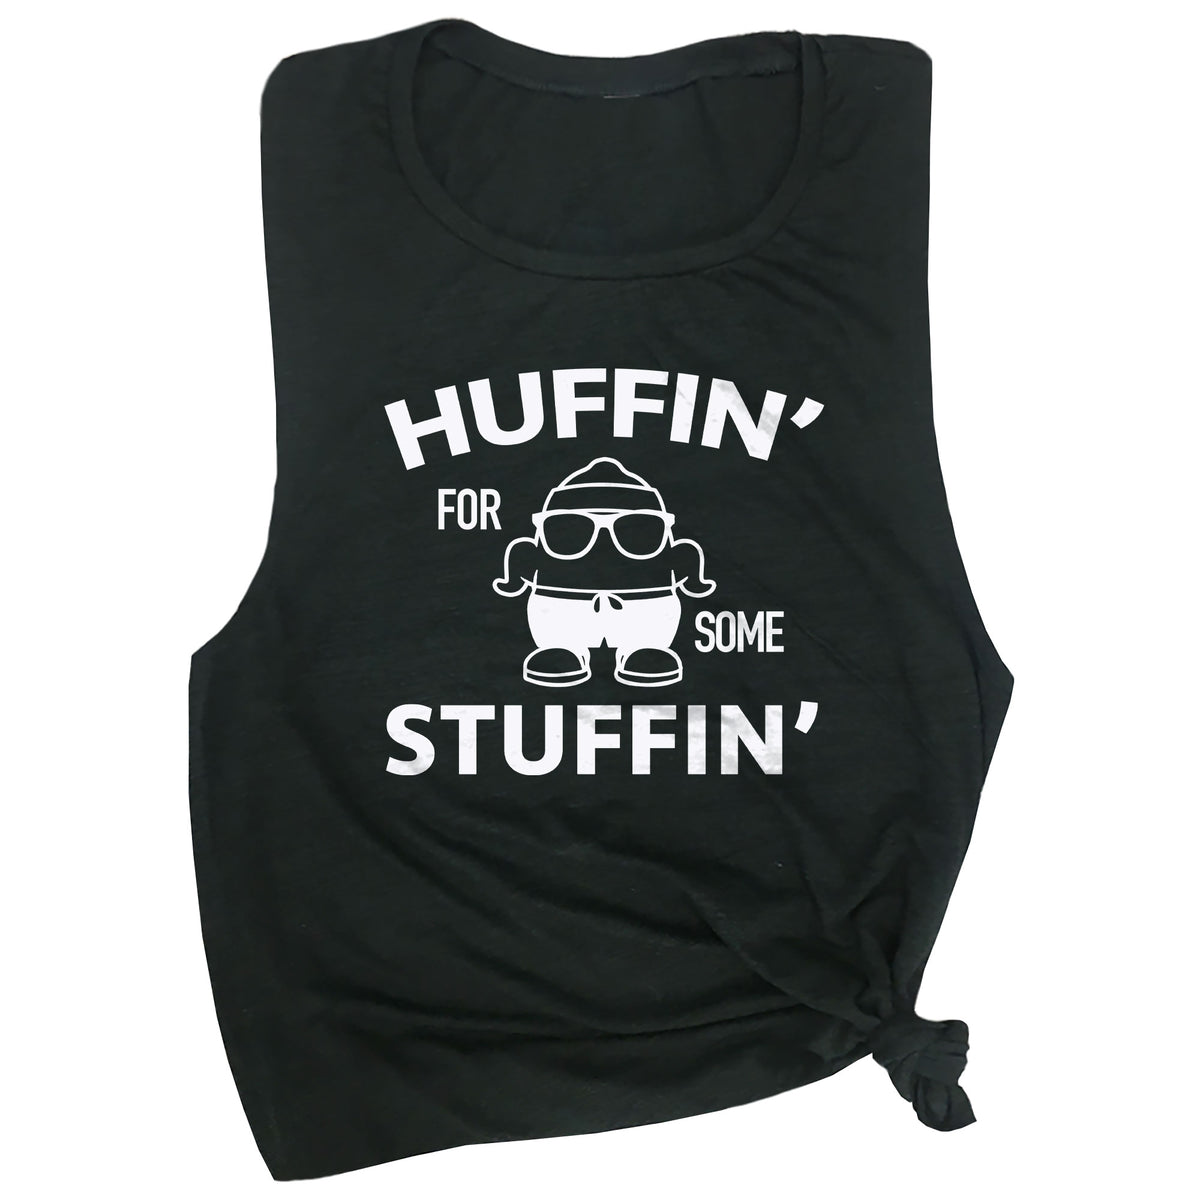 Huffin' for Some Stuffin' Muscle Tee